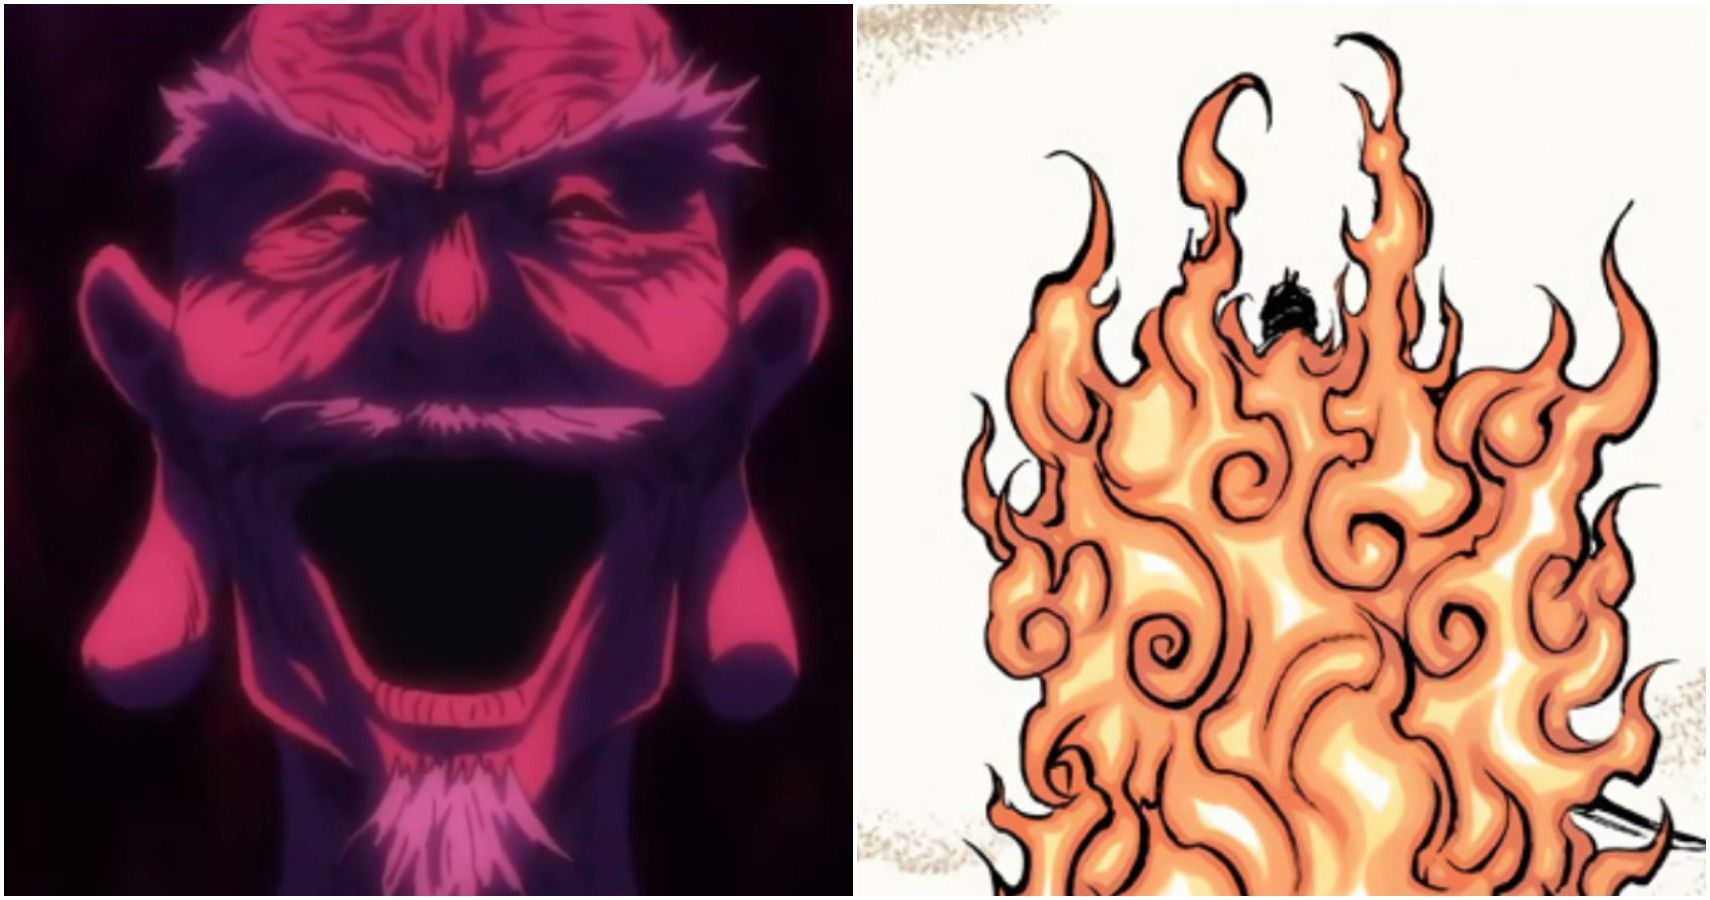 Hunter x Hunter Has Just CHANGED FOREVER: BEYOND NETERO & DARK CONTINENT'S  BIGGEST MYSTERY SOLVED! 